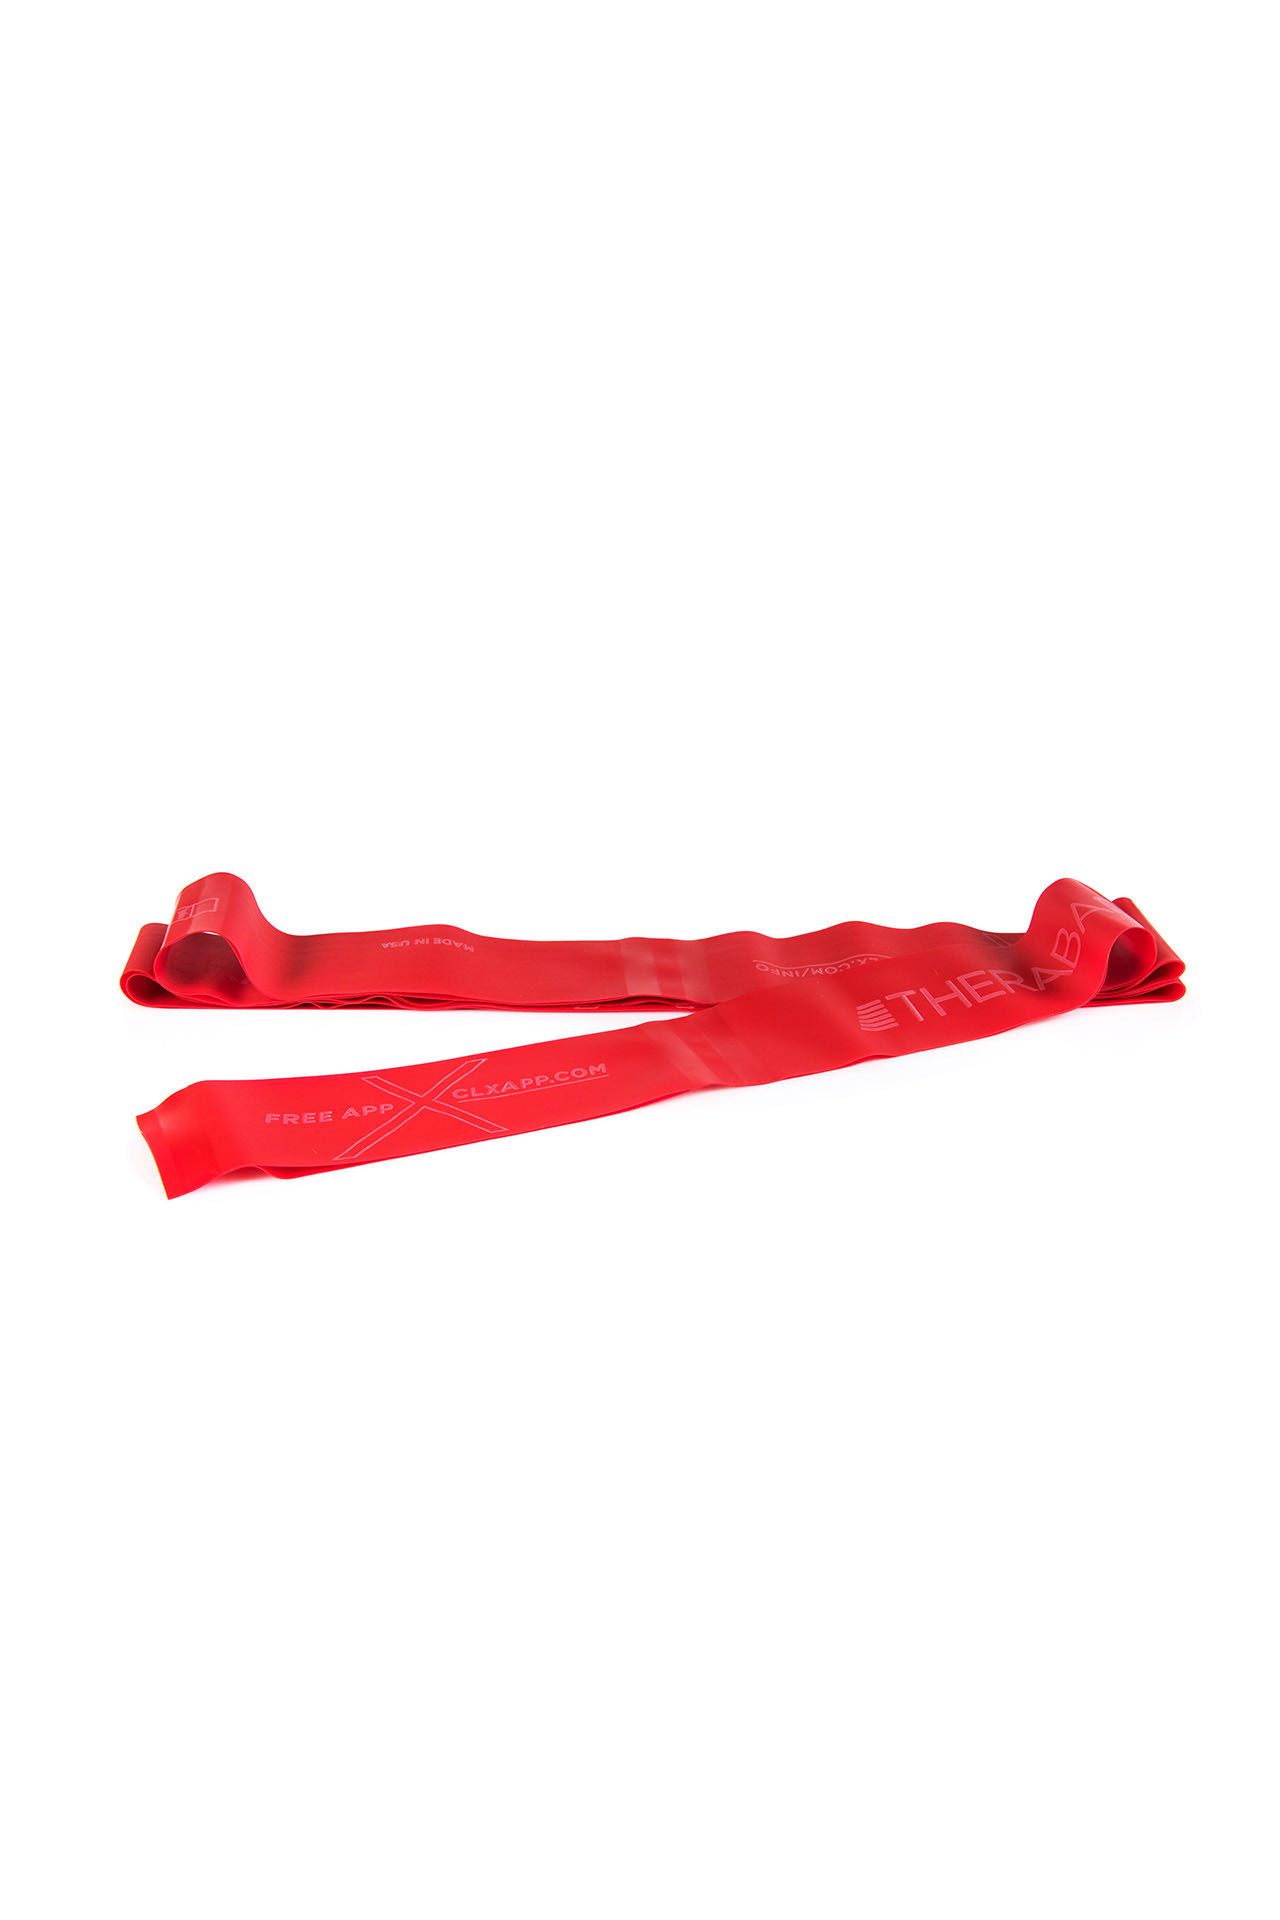 clx theraband trainingsband fitness sport fengbao kung fu wien 1080 rot